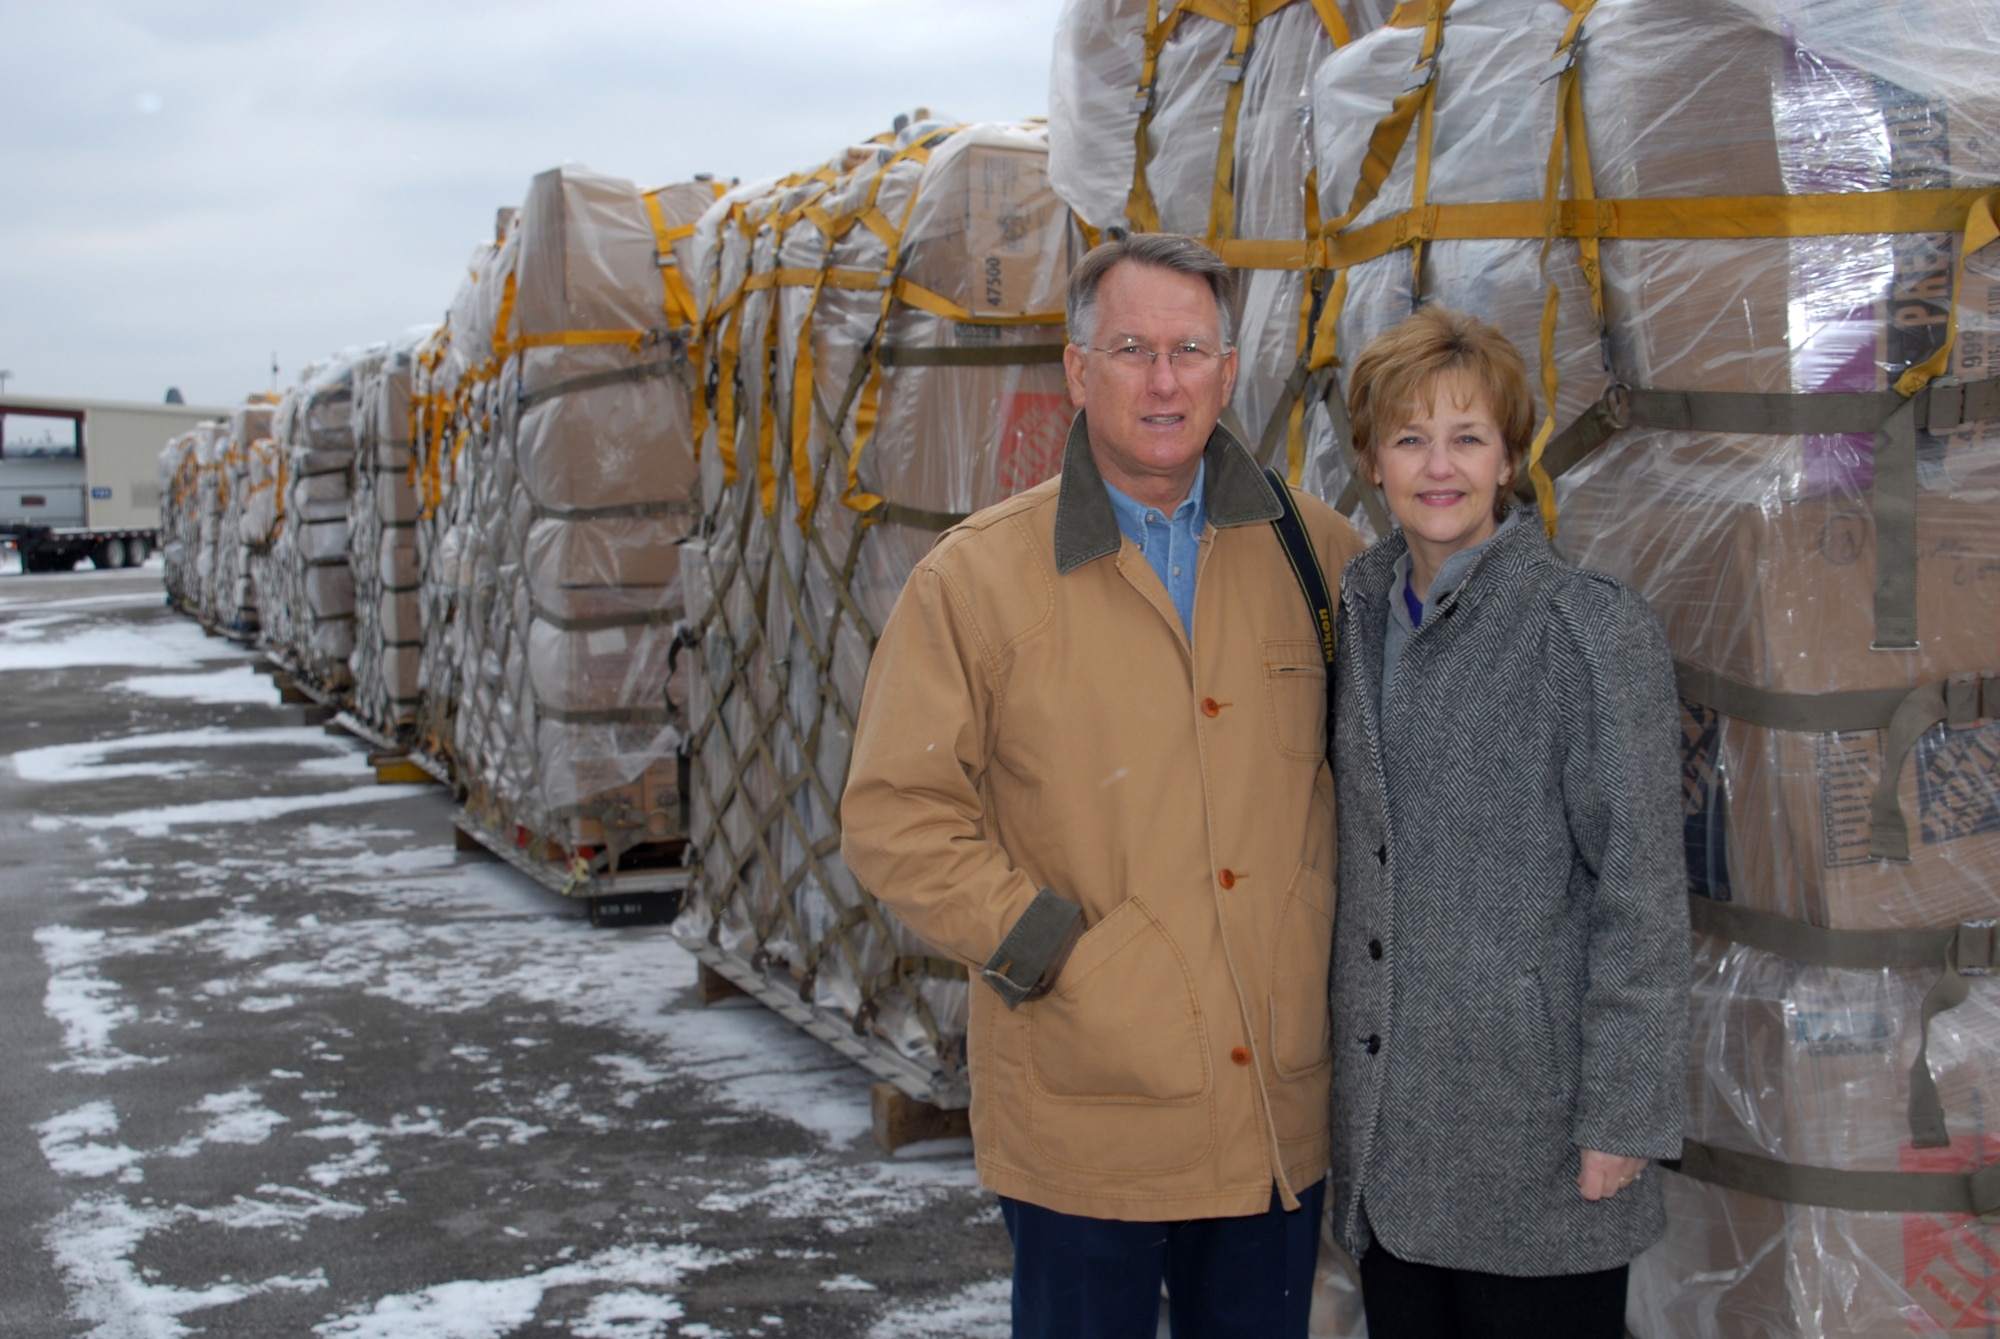 Retired Lt. Gen. John Bradley and wife Jan, who founded the Lamia Afghan Foundation, stand by pallets of humanitarian supplies bound for Afghanistan in 2010. More than 60,000 pounds of aid were flown to Afghanistan Mid-January 2010. In all, the Bradleys are working on building the seventh school and have collected and delivered more than two million pounds of supplies. (Courtesy photo)